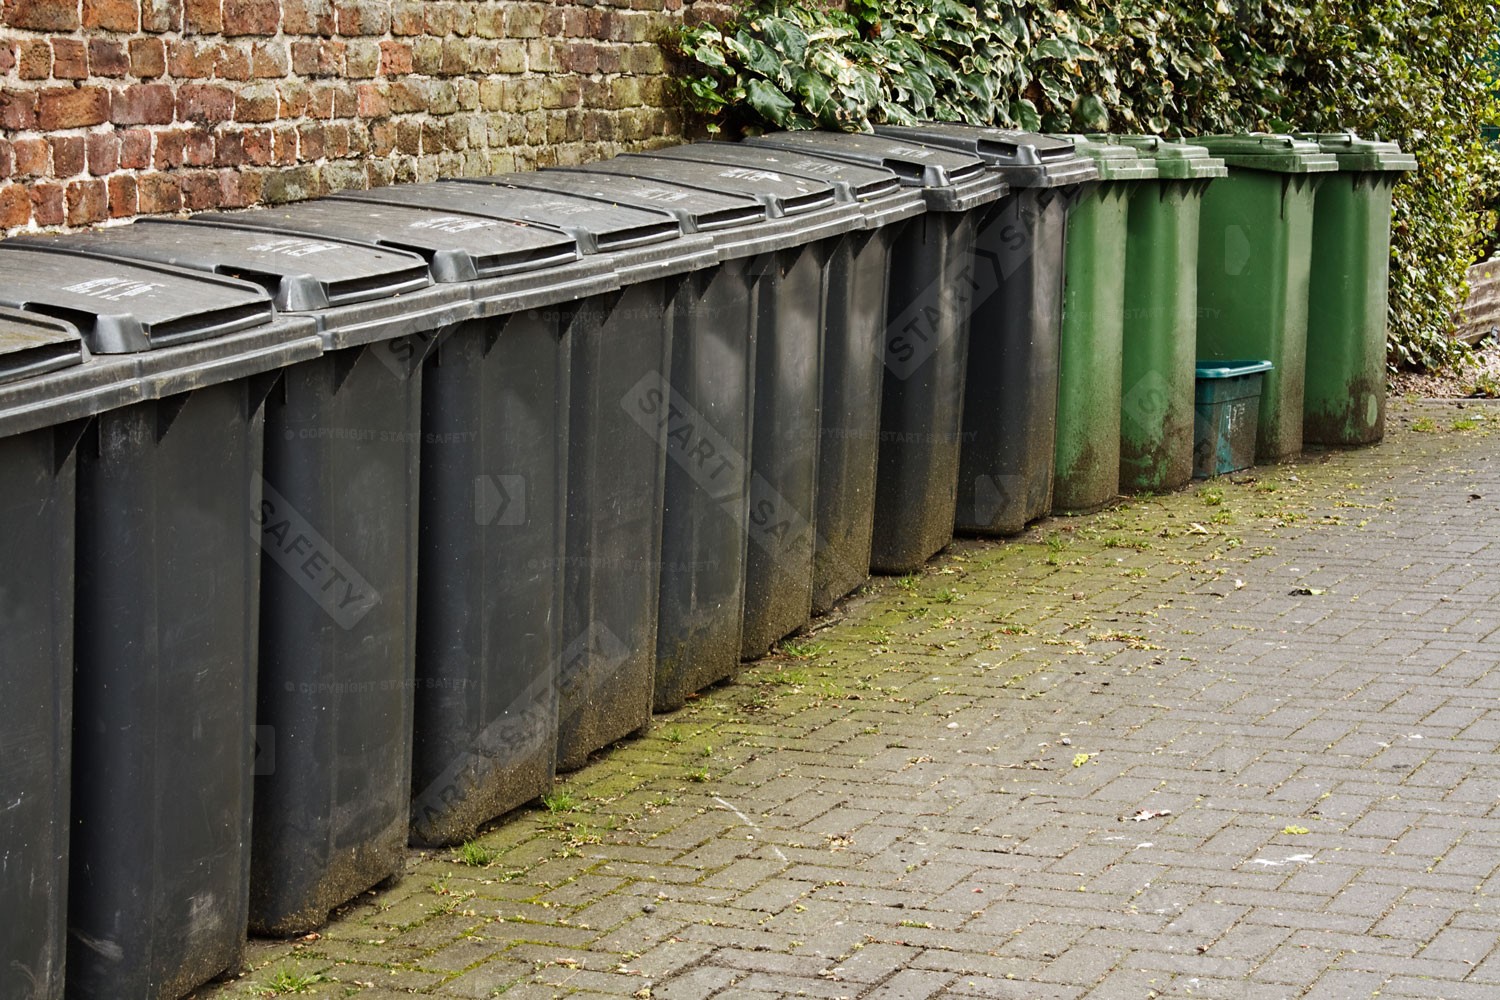 A Large Amount Of Wheelie Bins That Could Be More Discretely Put Away Within A Shelter